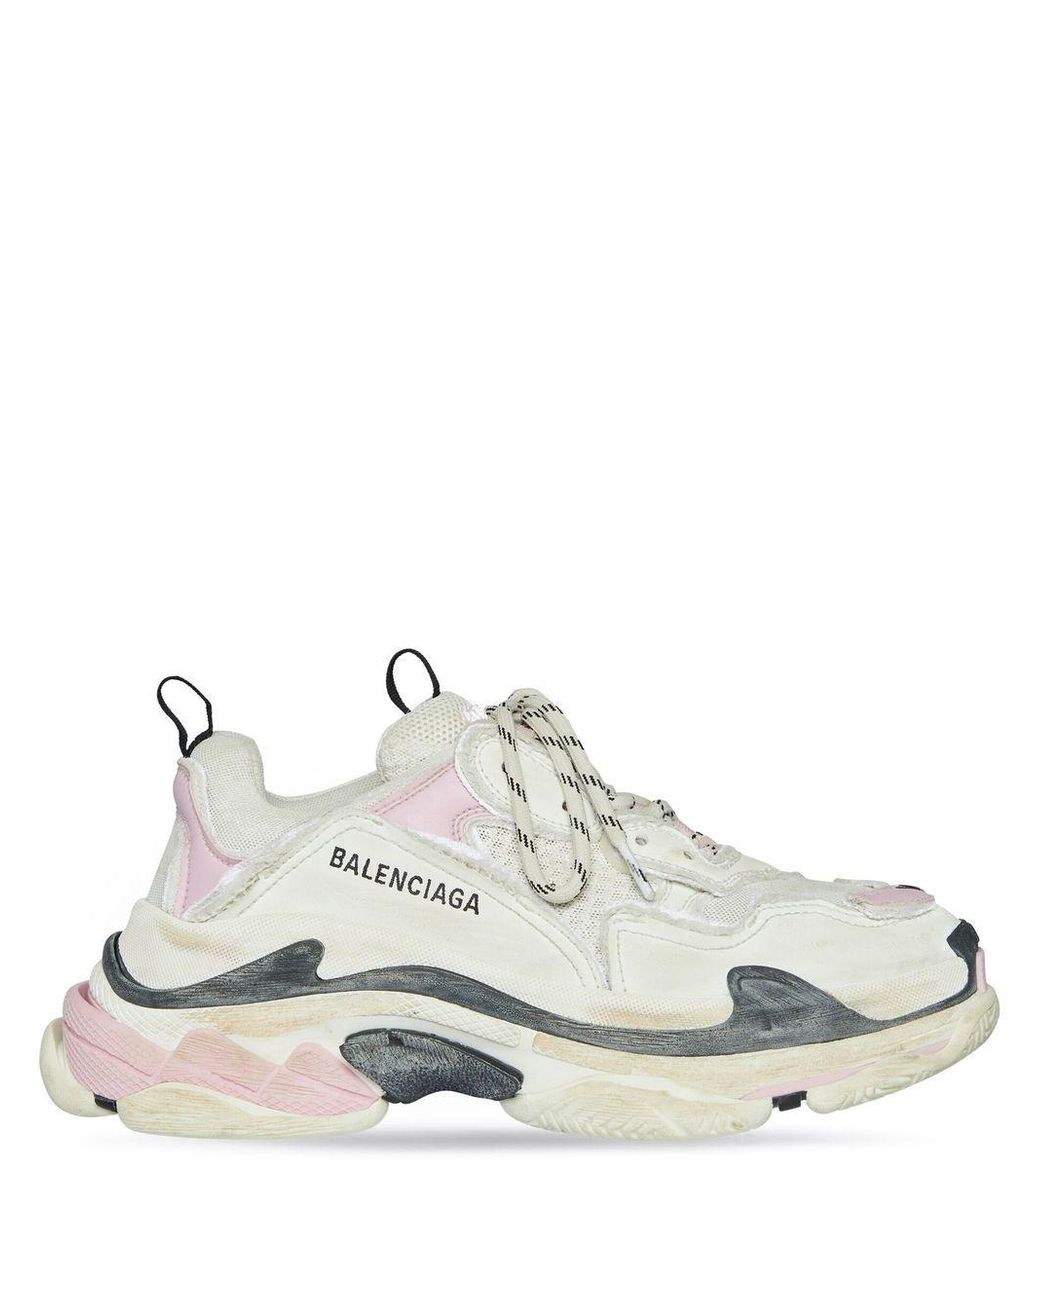 Balenciaga Triple S Sneakers in Weiß | Lyst AT